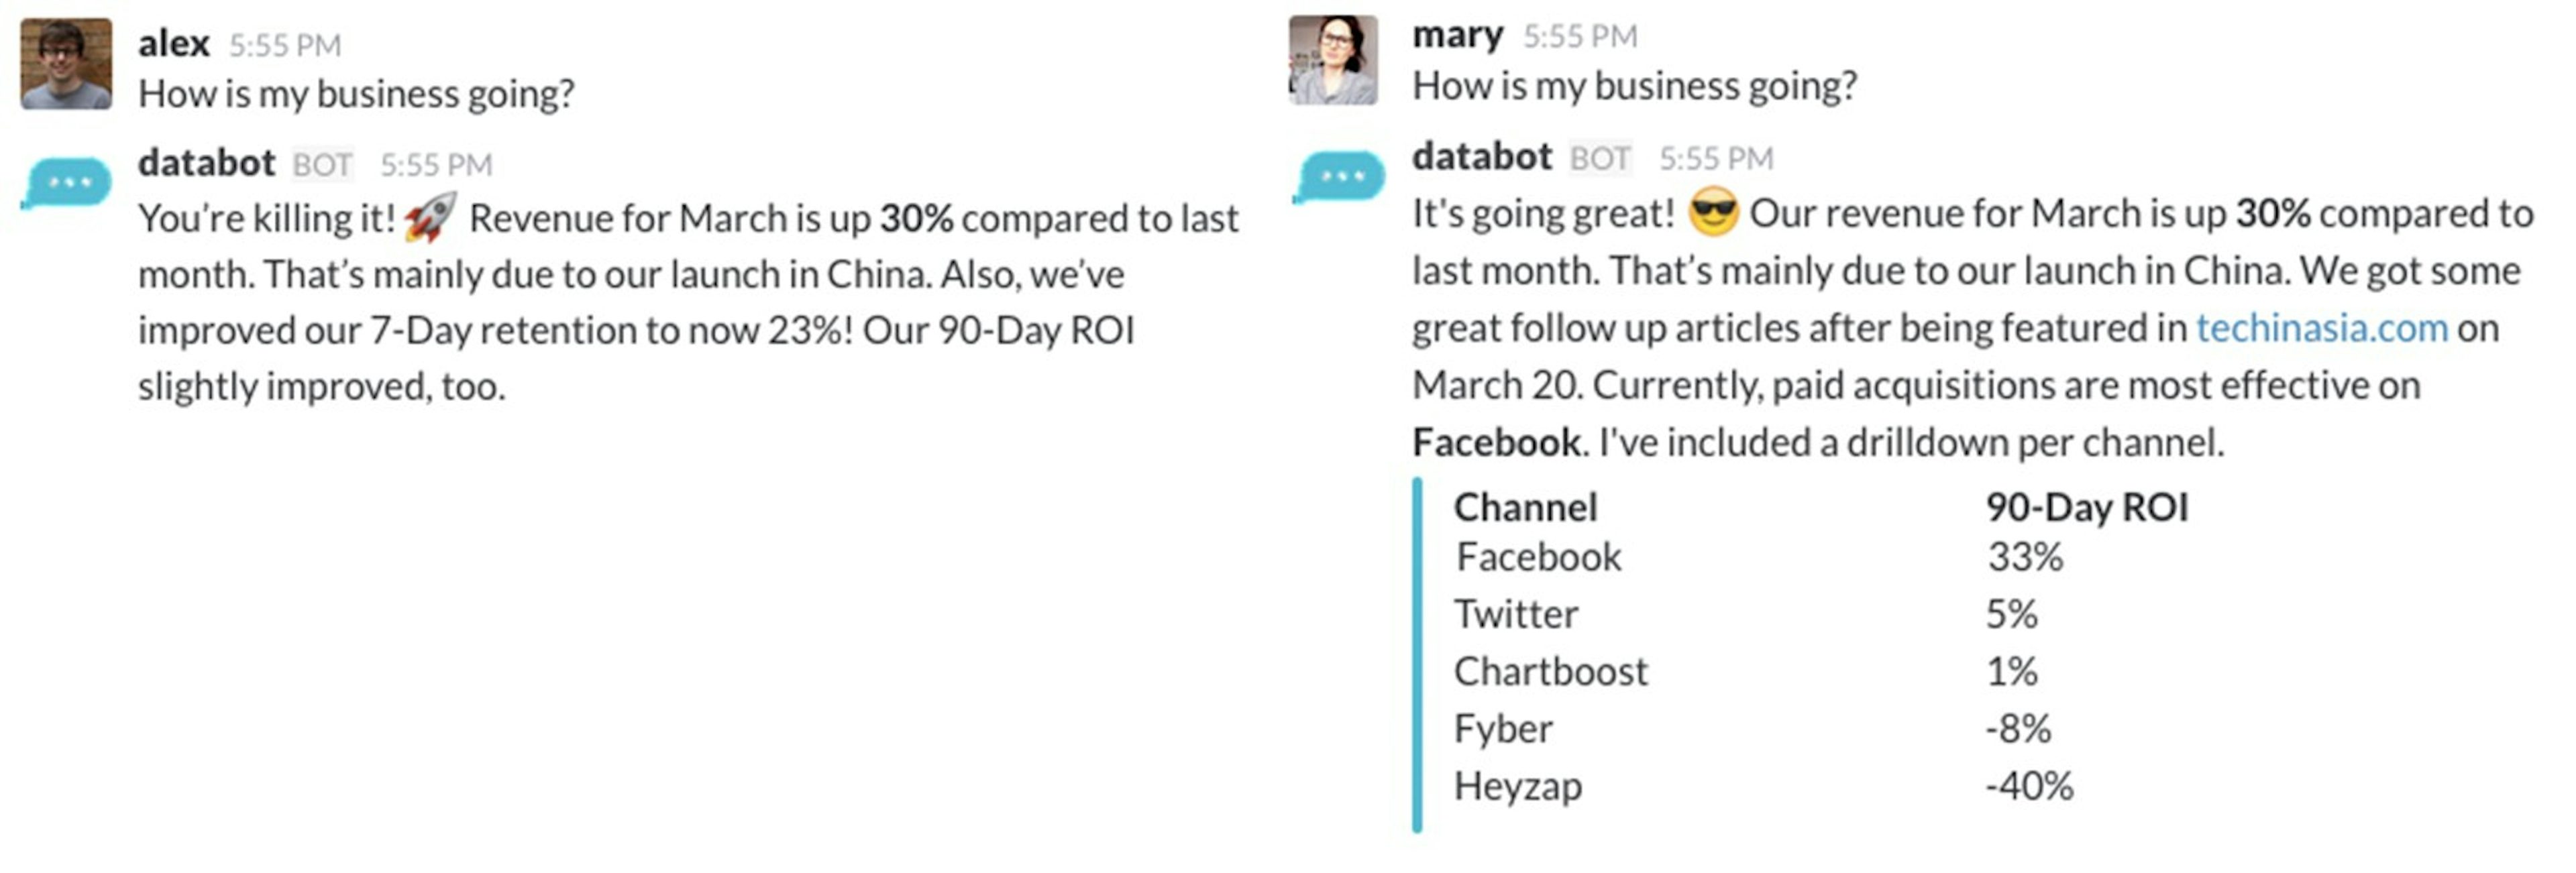 *Two users ask the **same **question but get a **personalized **answer based on their different **jobs **and **preferences. *Alex (CEO) gets an Executive Summary while Mary (CMO) gets an overview of channel performance.